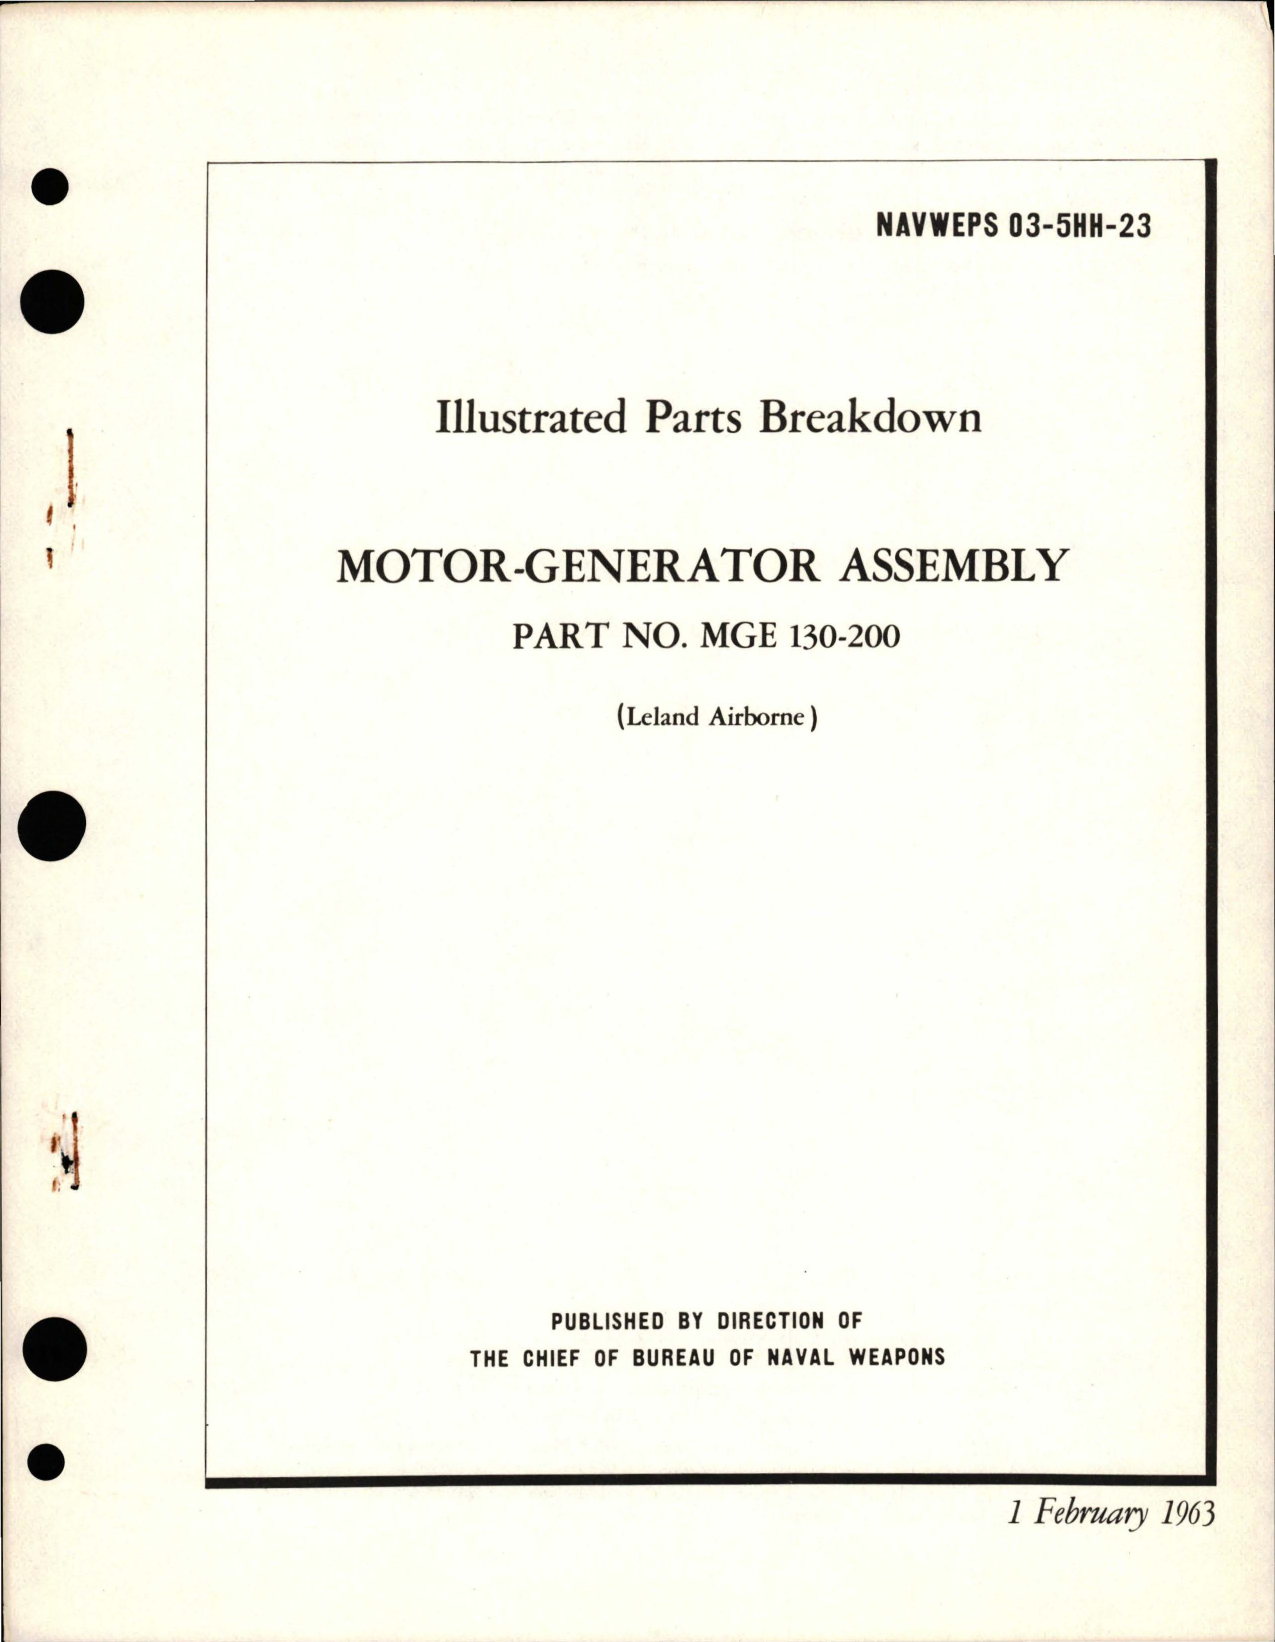 Sample page 1 from AirCorps Library document: Illustrated Parts Breakdown for Motor-Generator Assembly - Part MGE 130-200